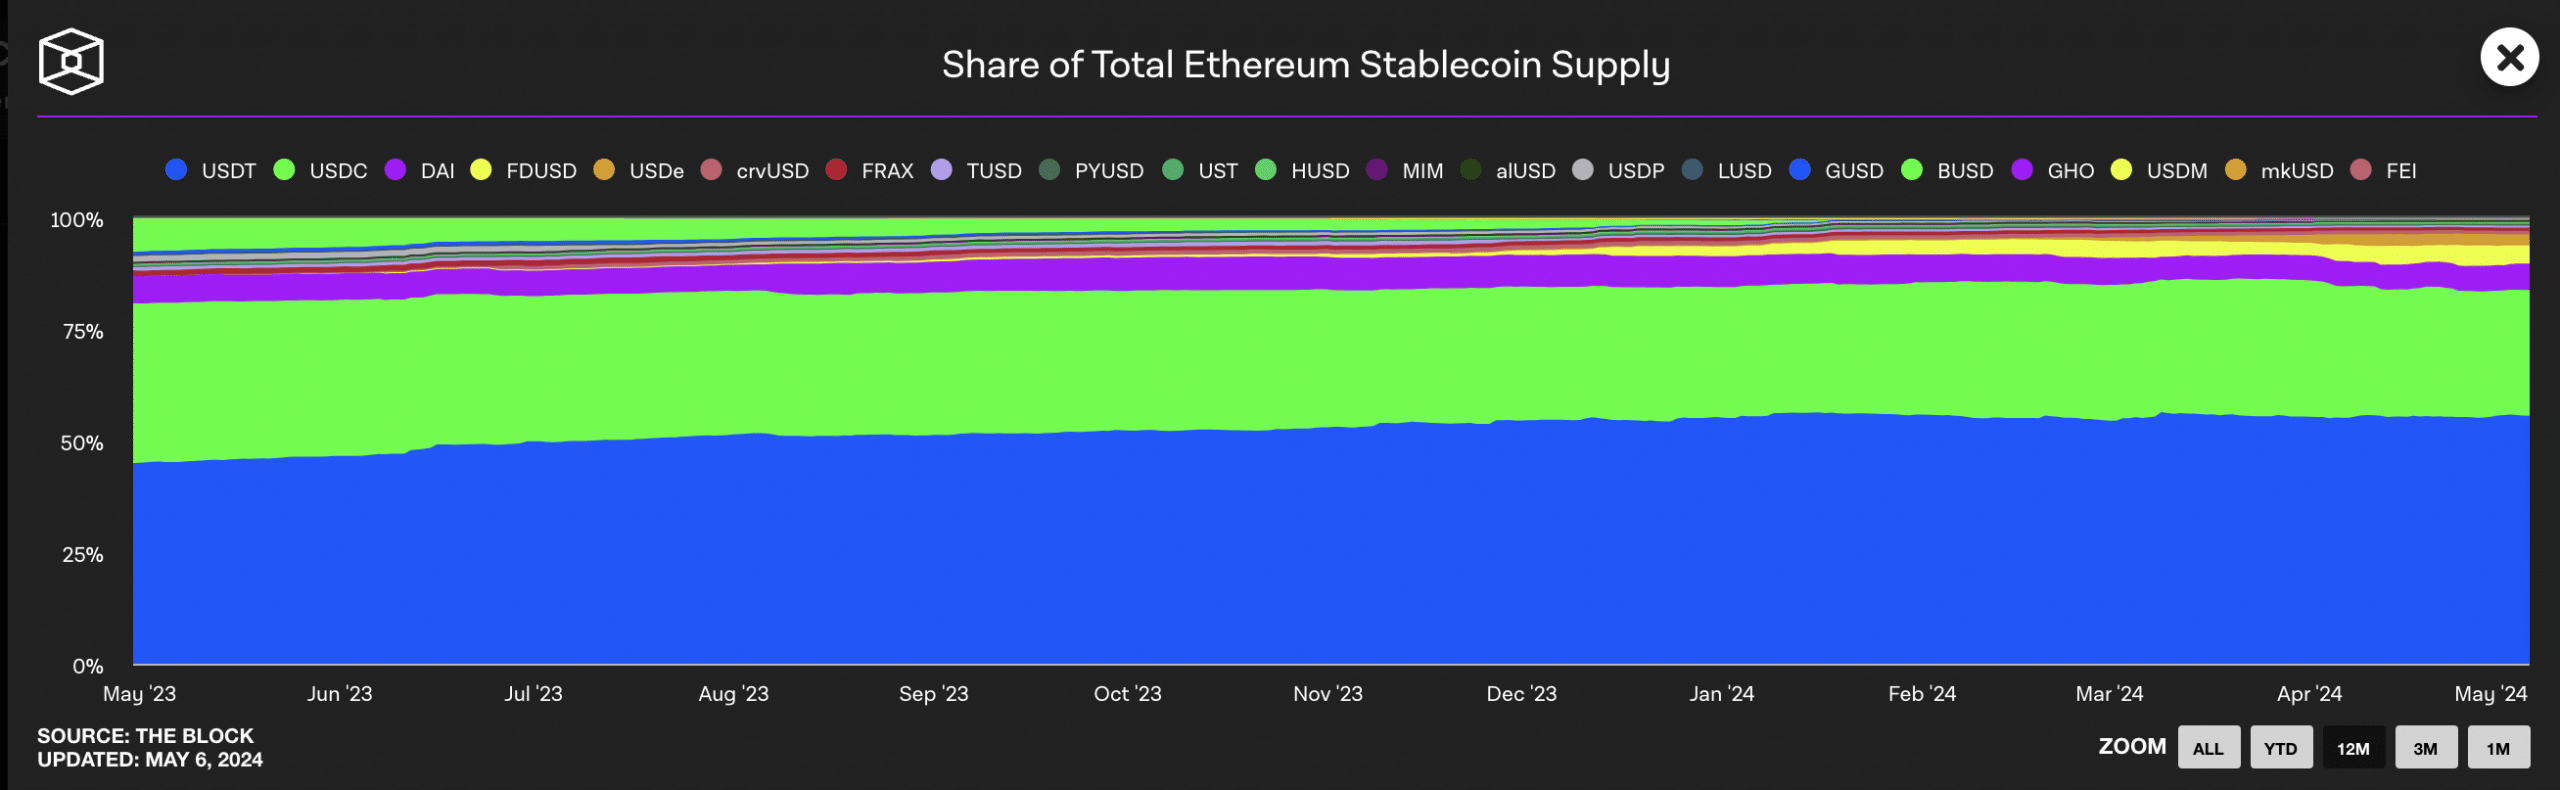 eth stablecoin supply